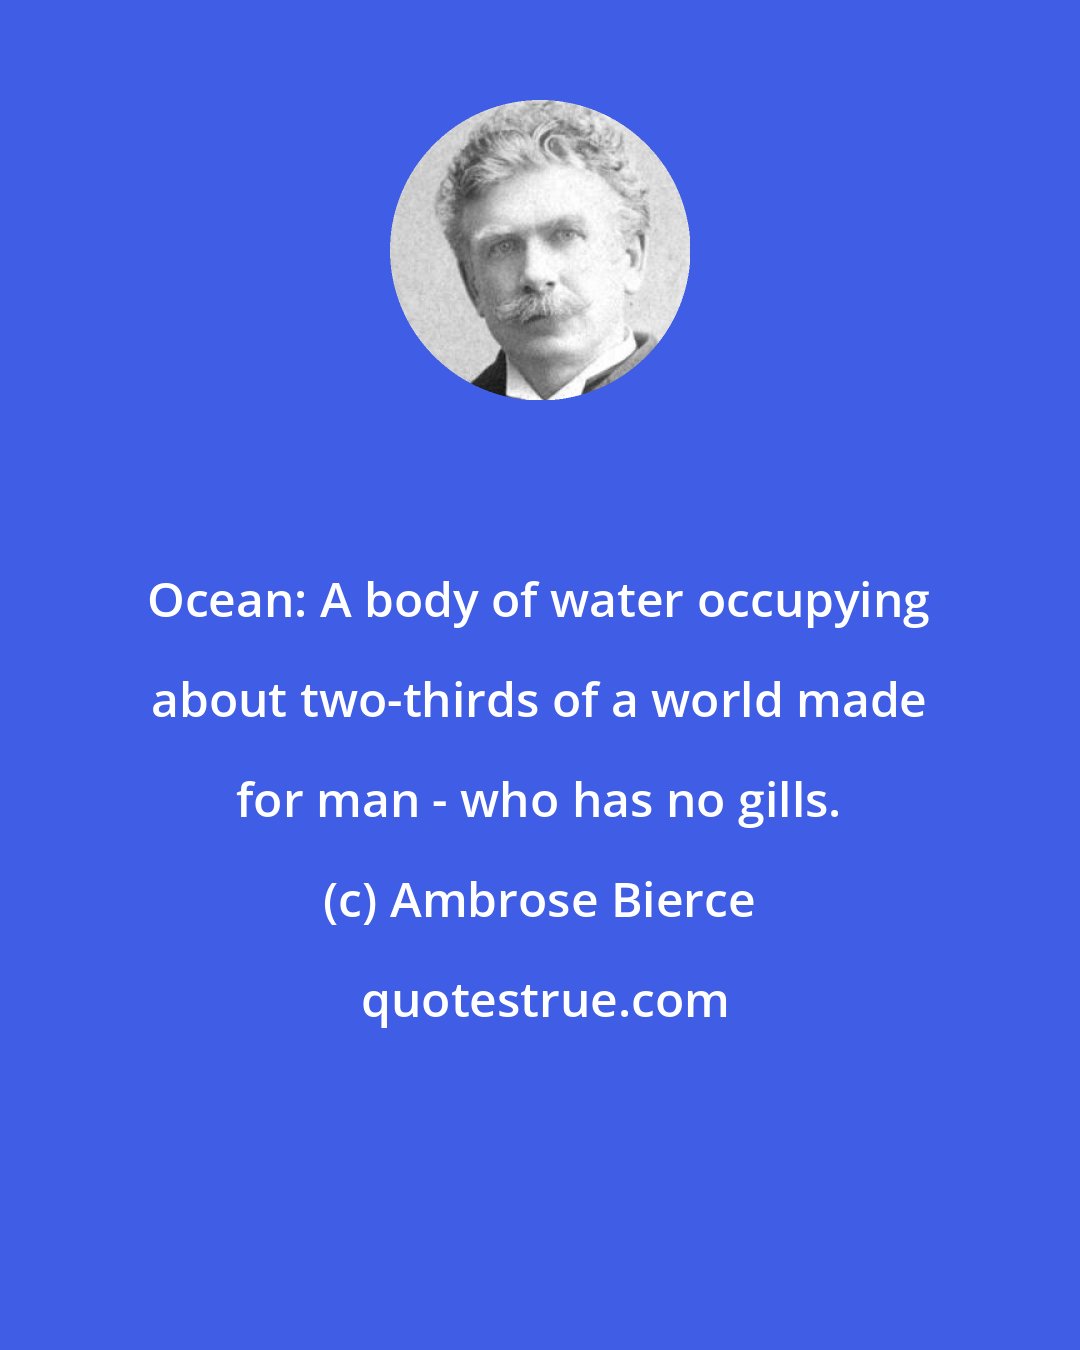 Ambrose Bierce: Ocean: A body of water occupying about two-thirds of a world made for man - who has no gills.